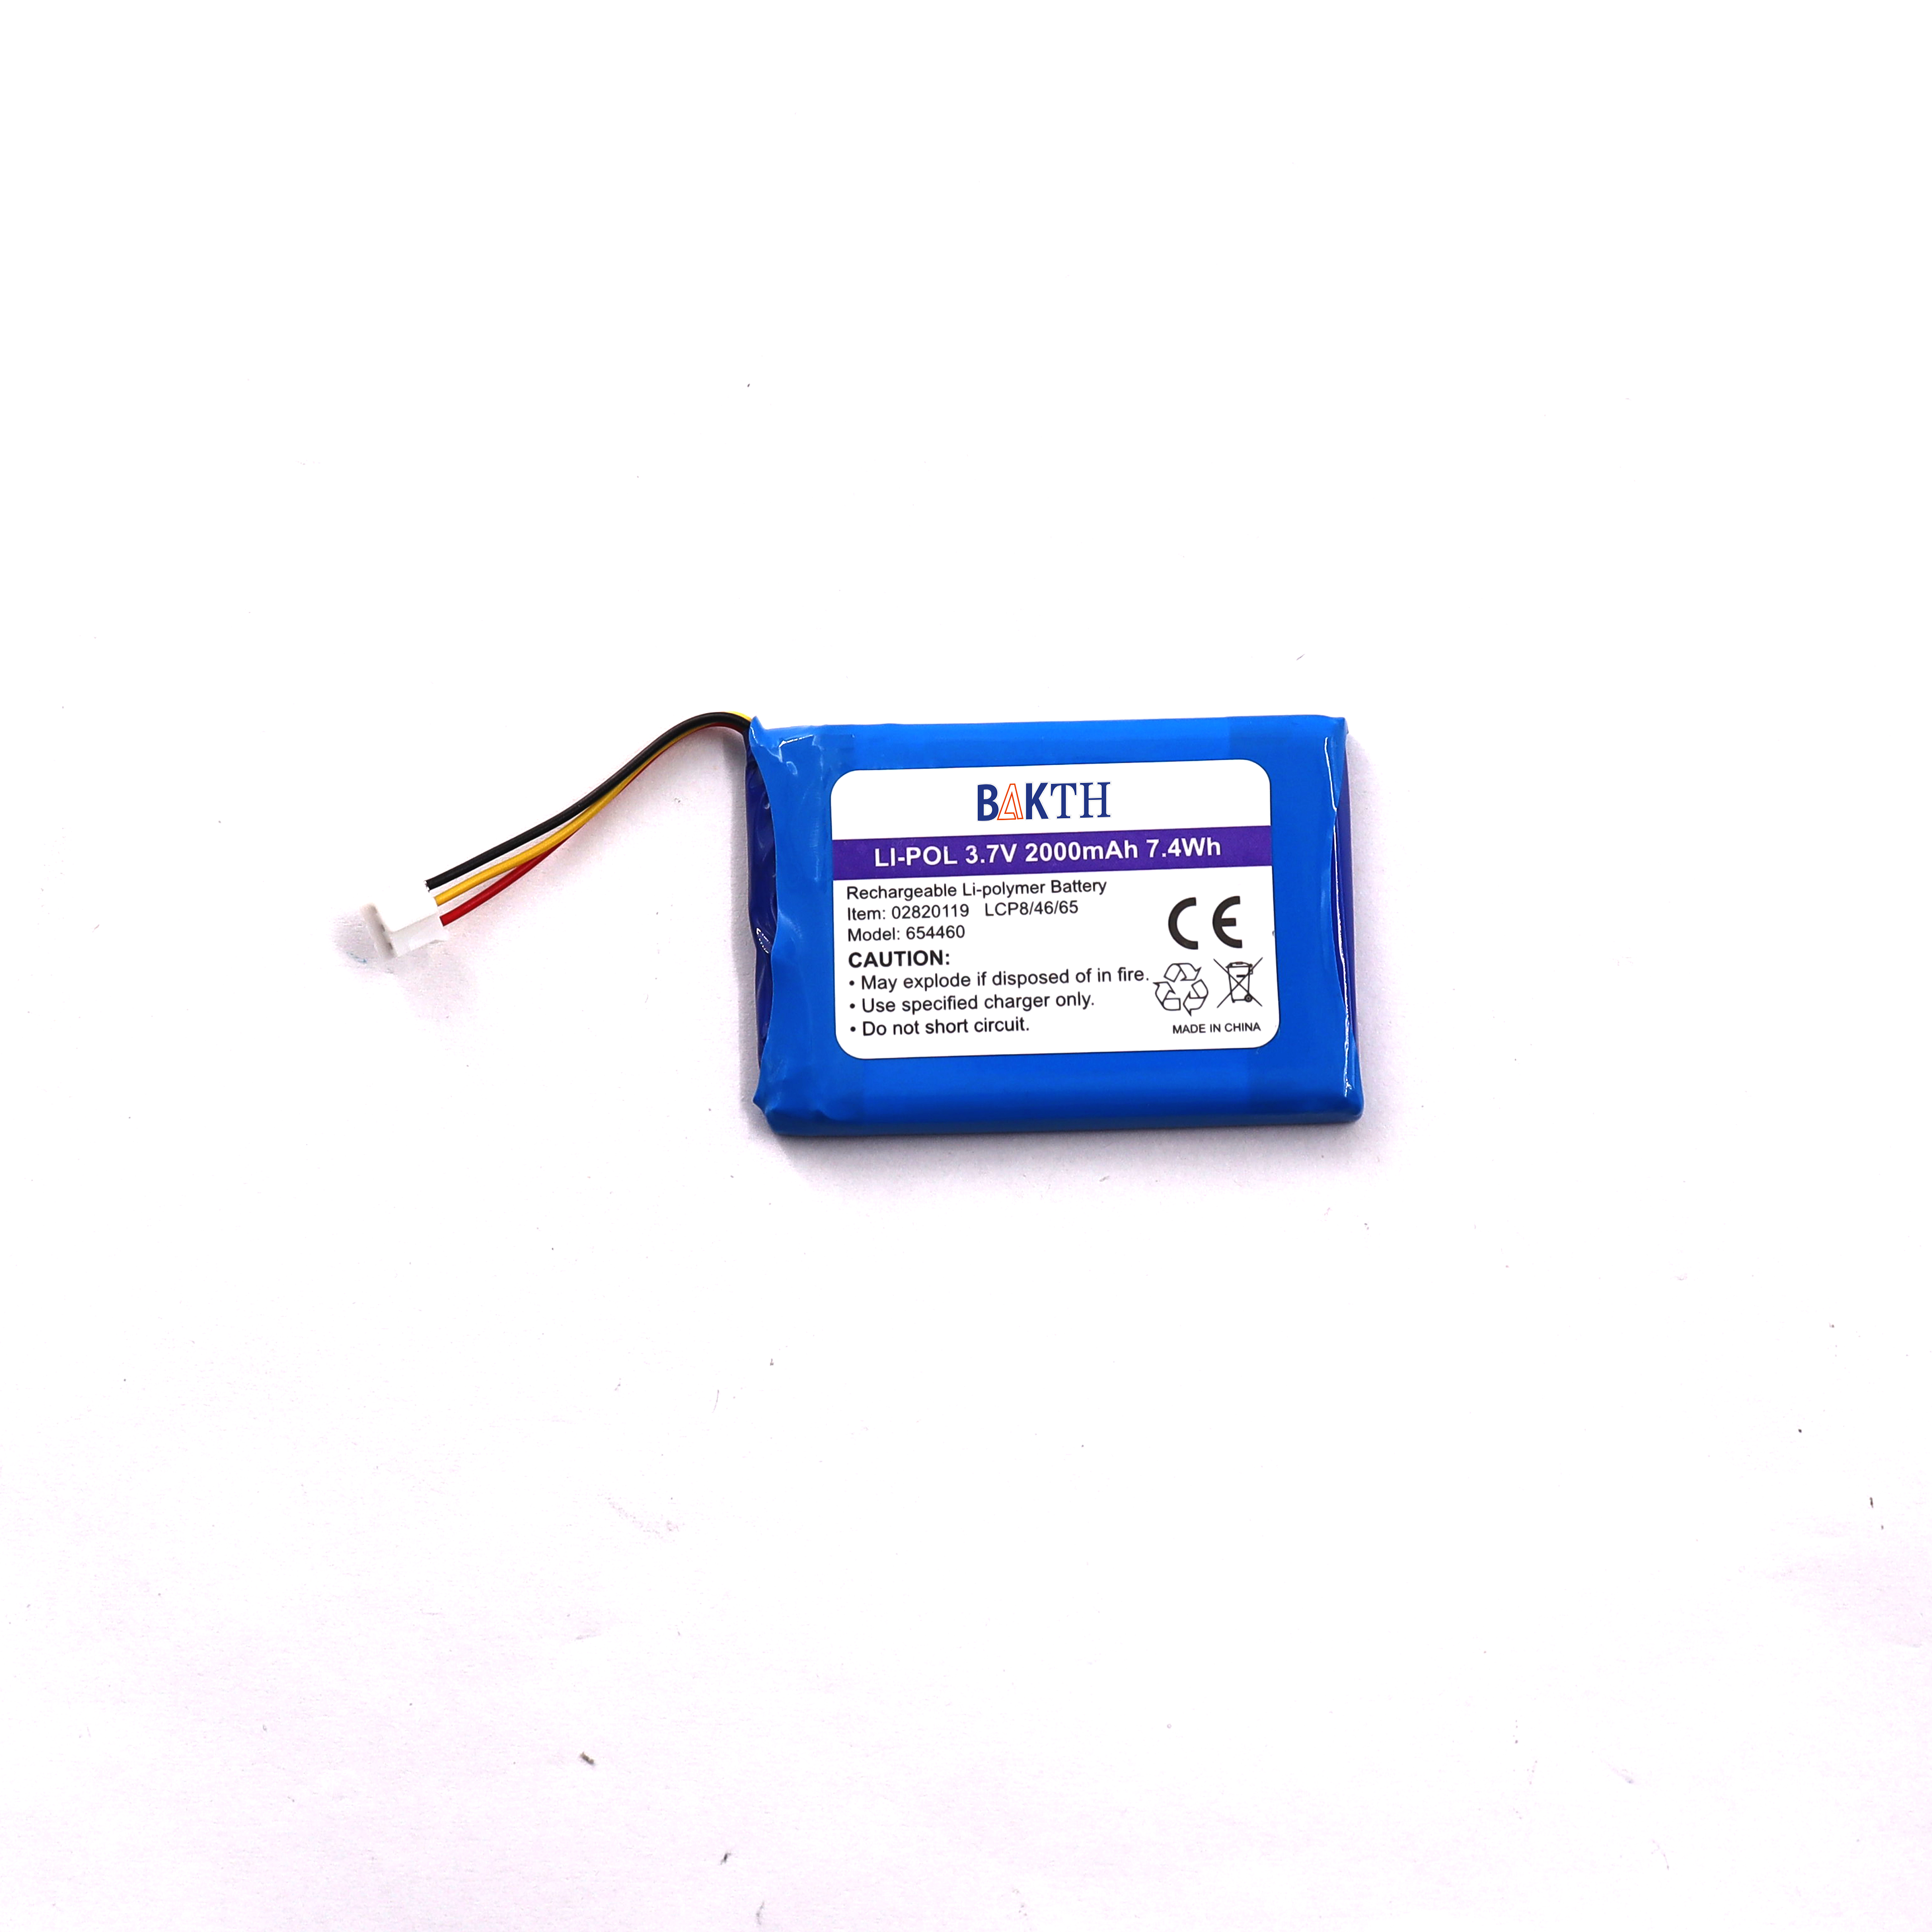 Rechargeable Li-ion 3.7V 2000mAh Lithium Ion Battery Polymer Battery Packs